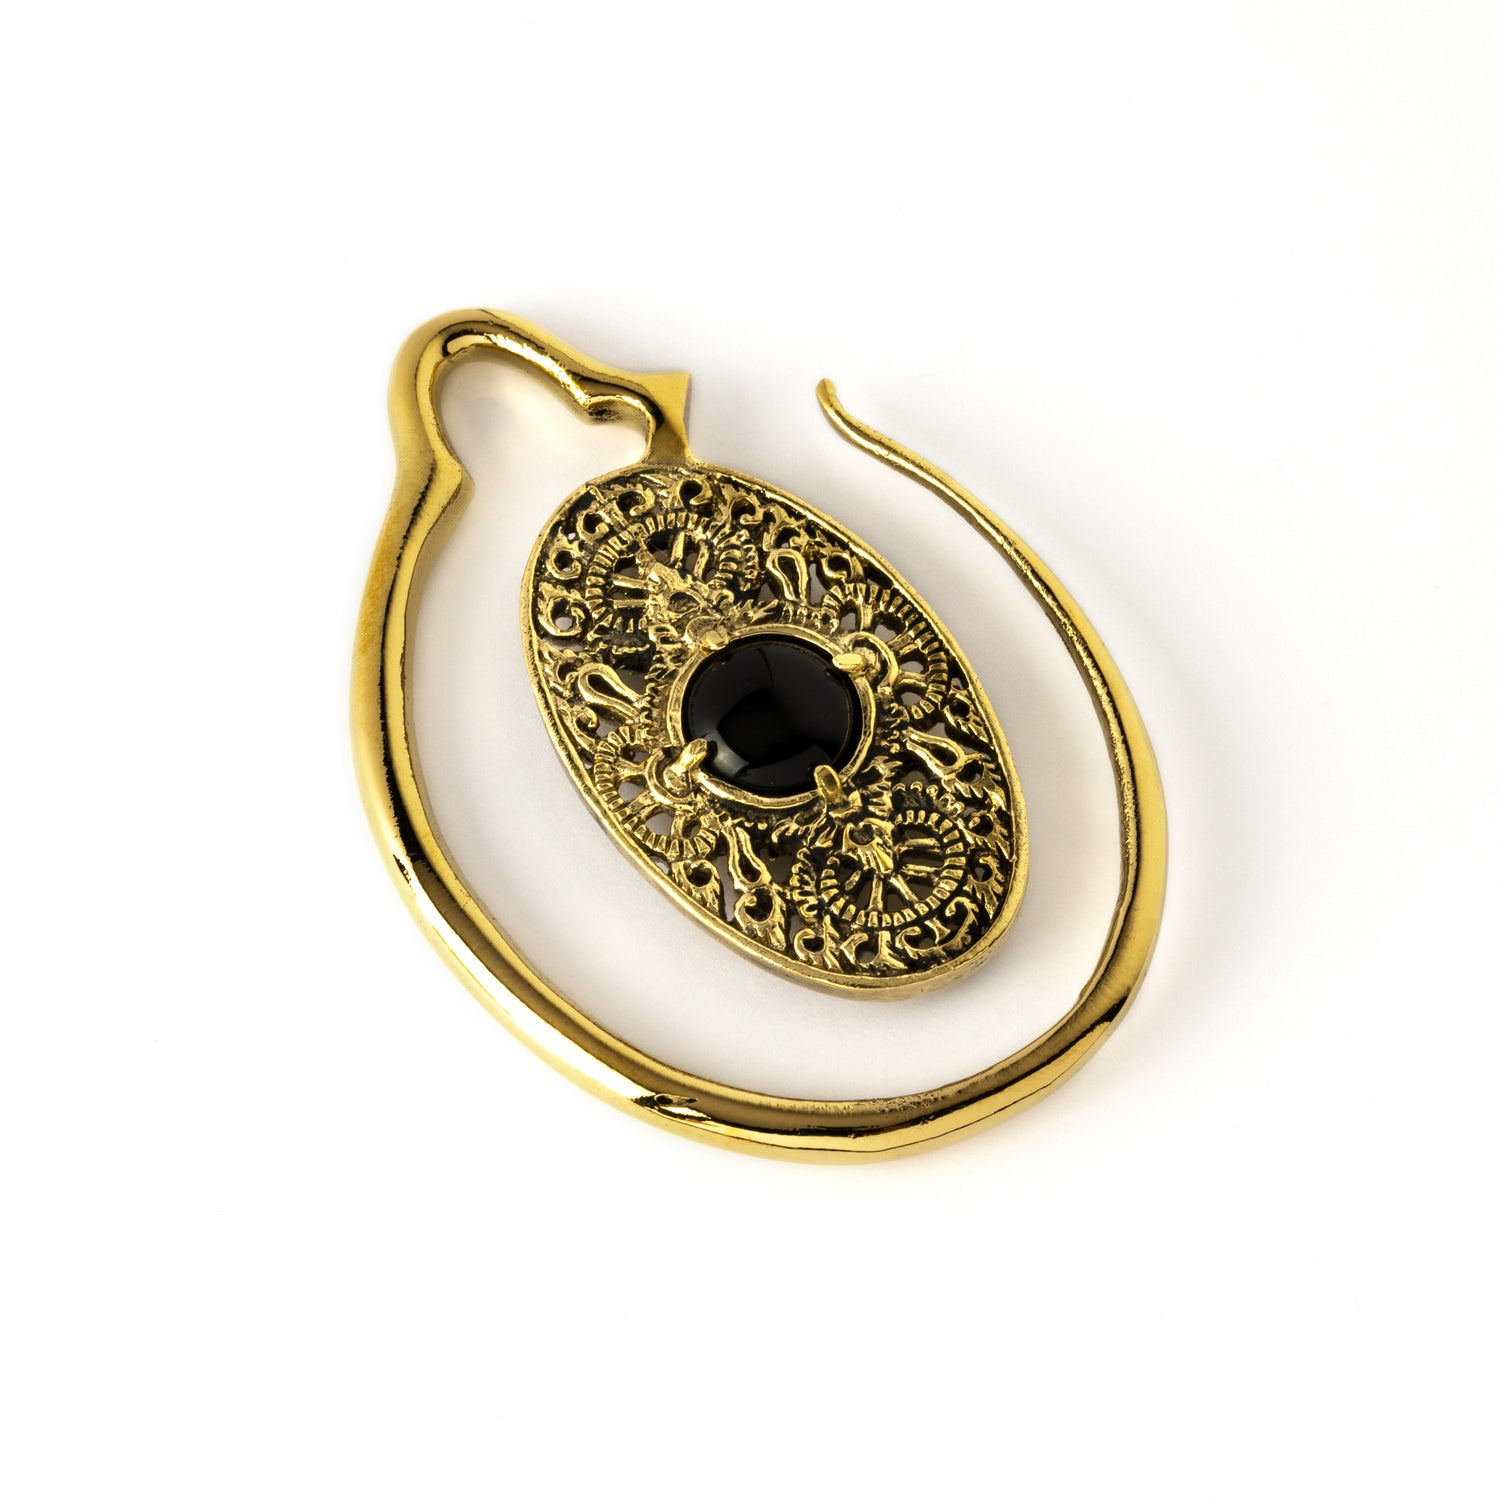 golden large ear weights hangers oval shaped with intricate filigree pattern an black onyx left side